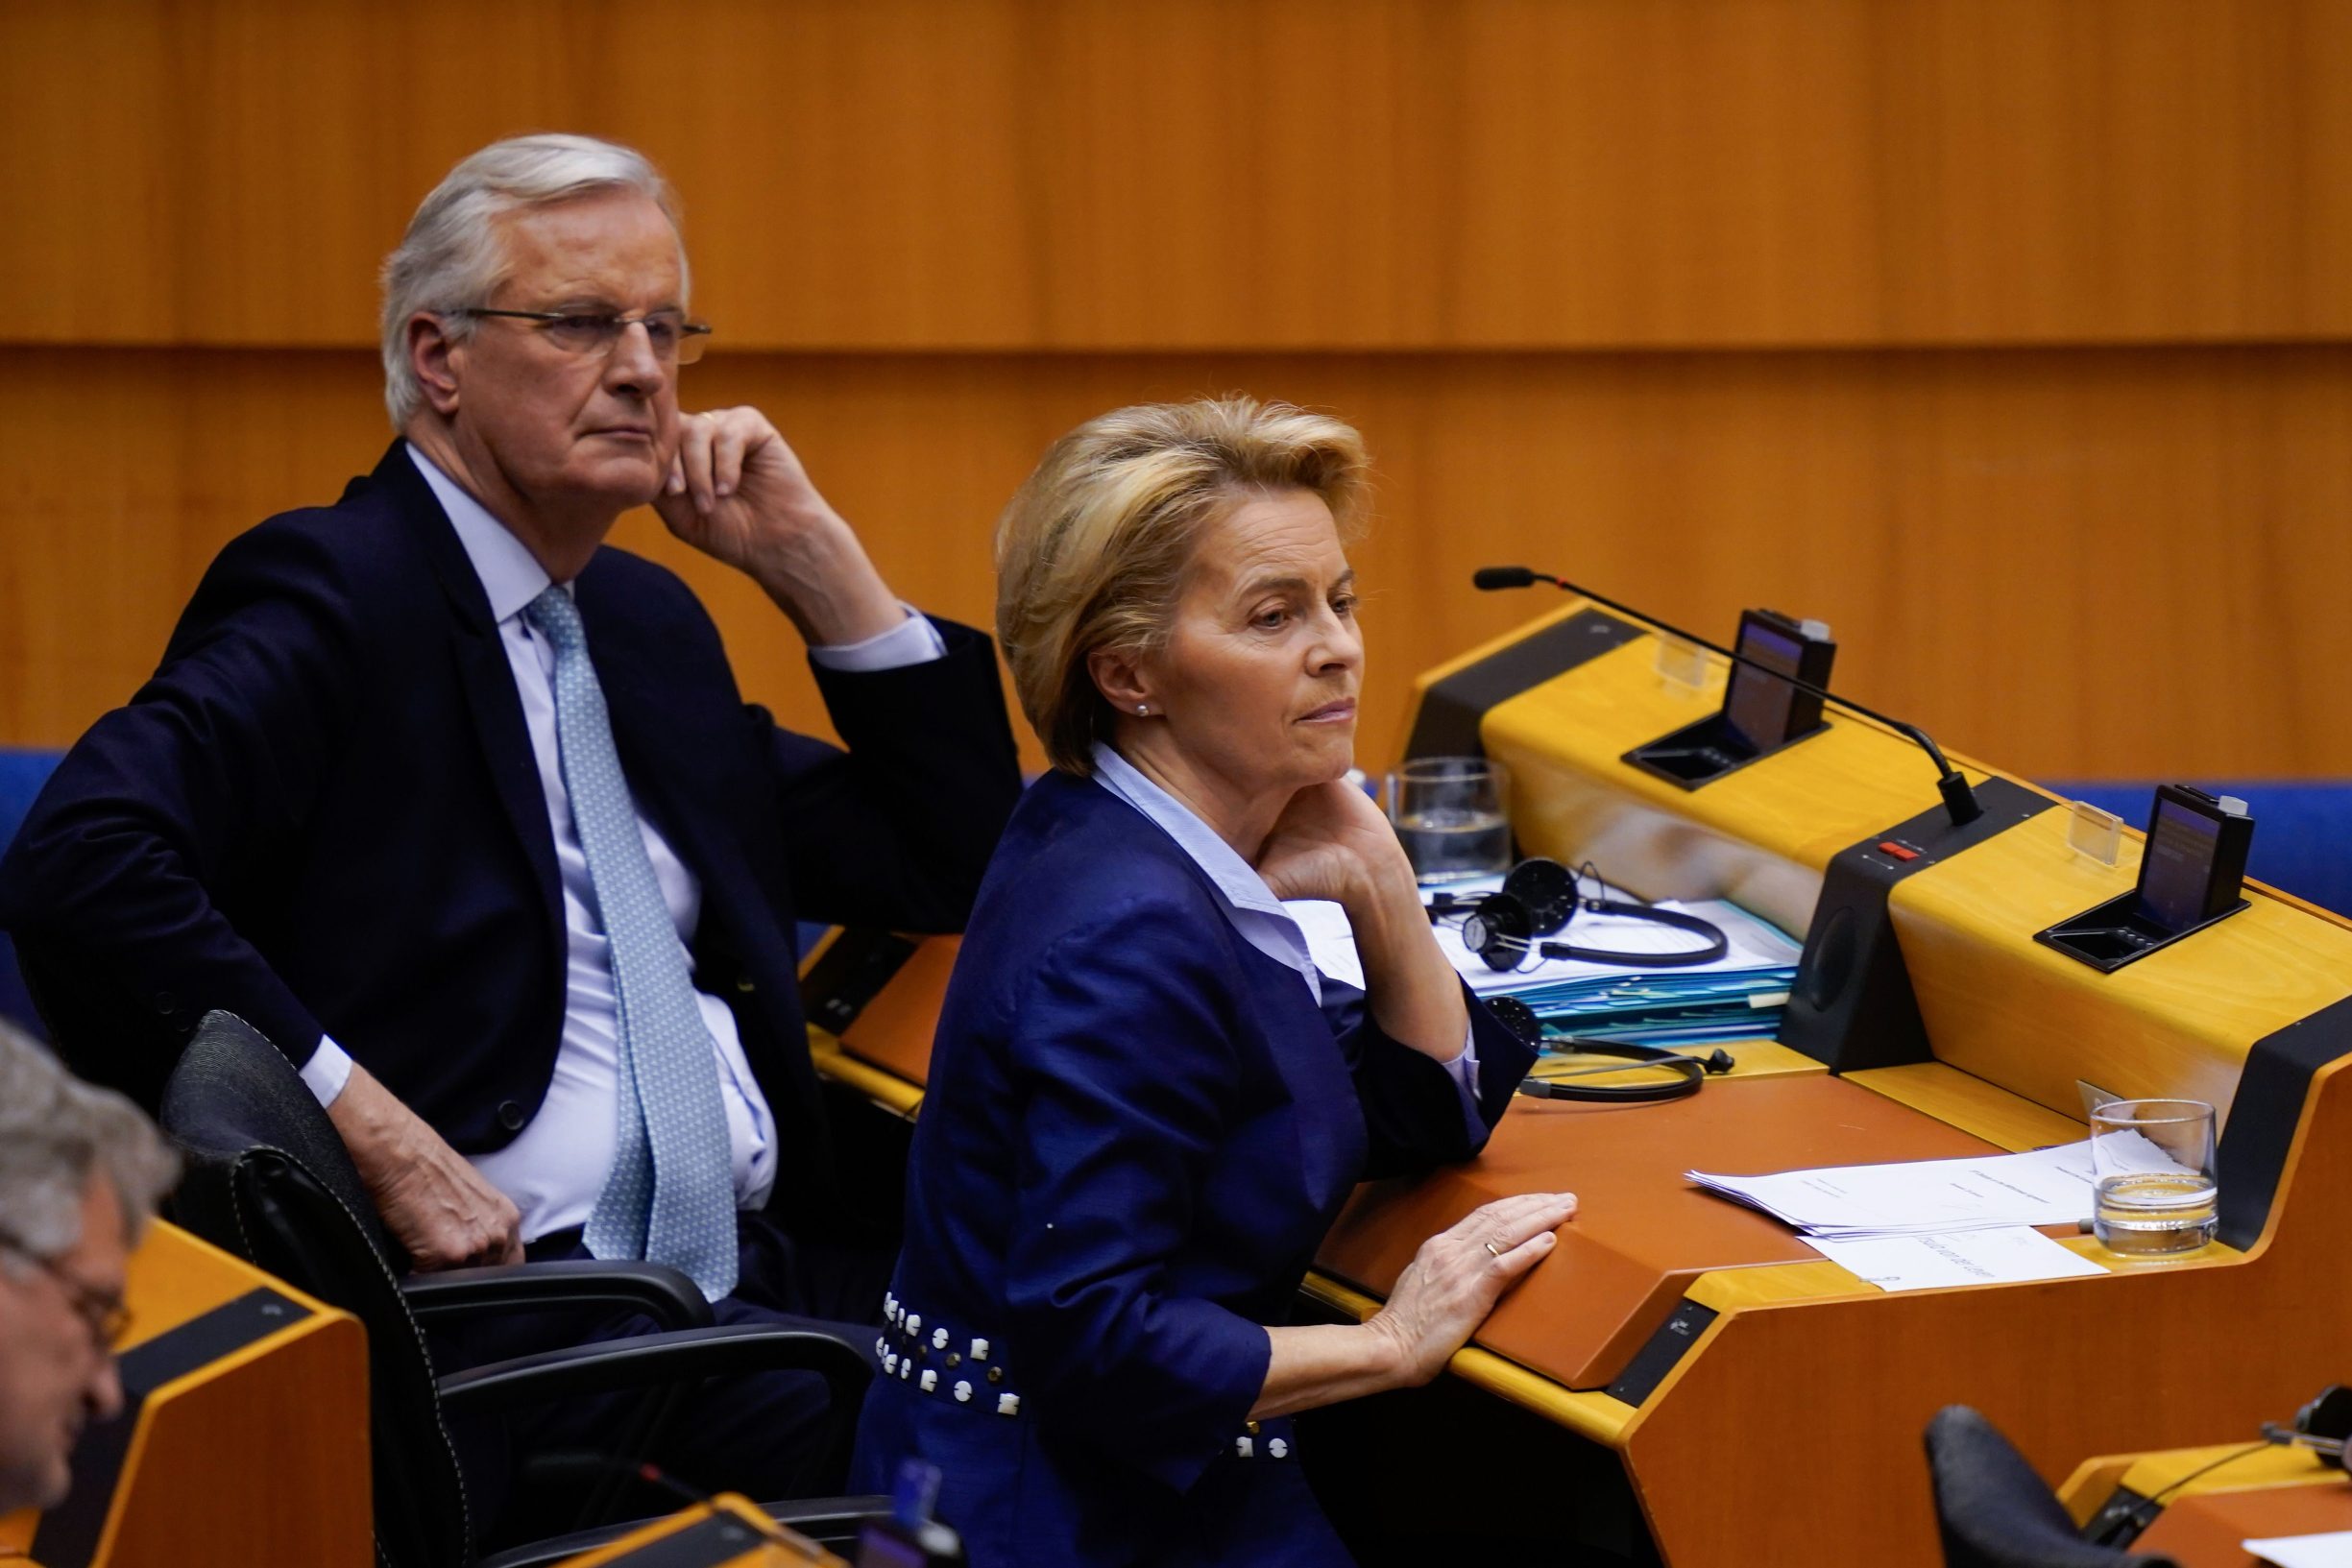 European Commission Chief Negociator Michel Barnier (L) and President of the European Commission Ursula von der Leyen look on during a plenary session in Brussels on January 29, 2020, as Brexit Day is to be set in stone when the European Parliament casts a vote ratifying the terms of Britain's divorce deal from the EU. (Photo by Kenzo TRIBOUILLARD / AFP)